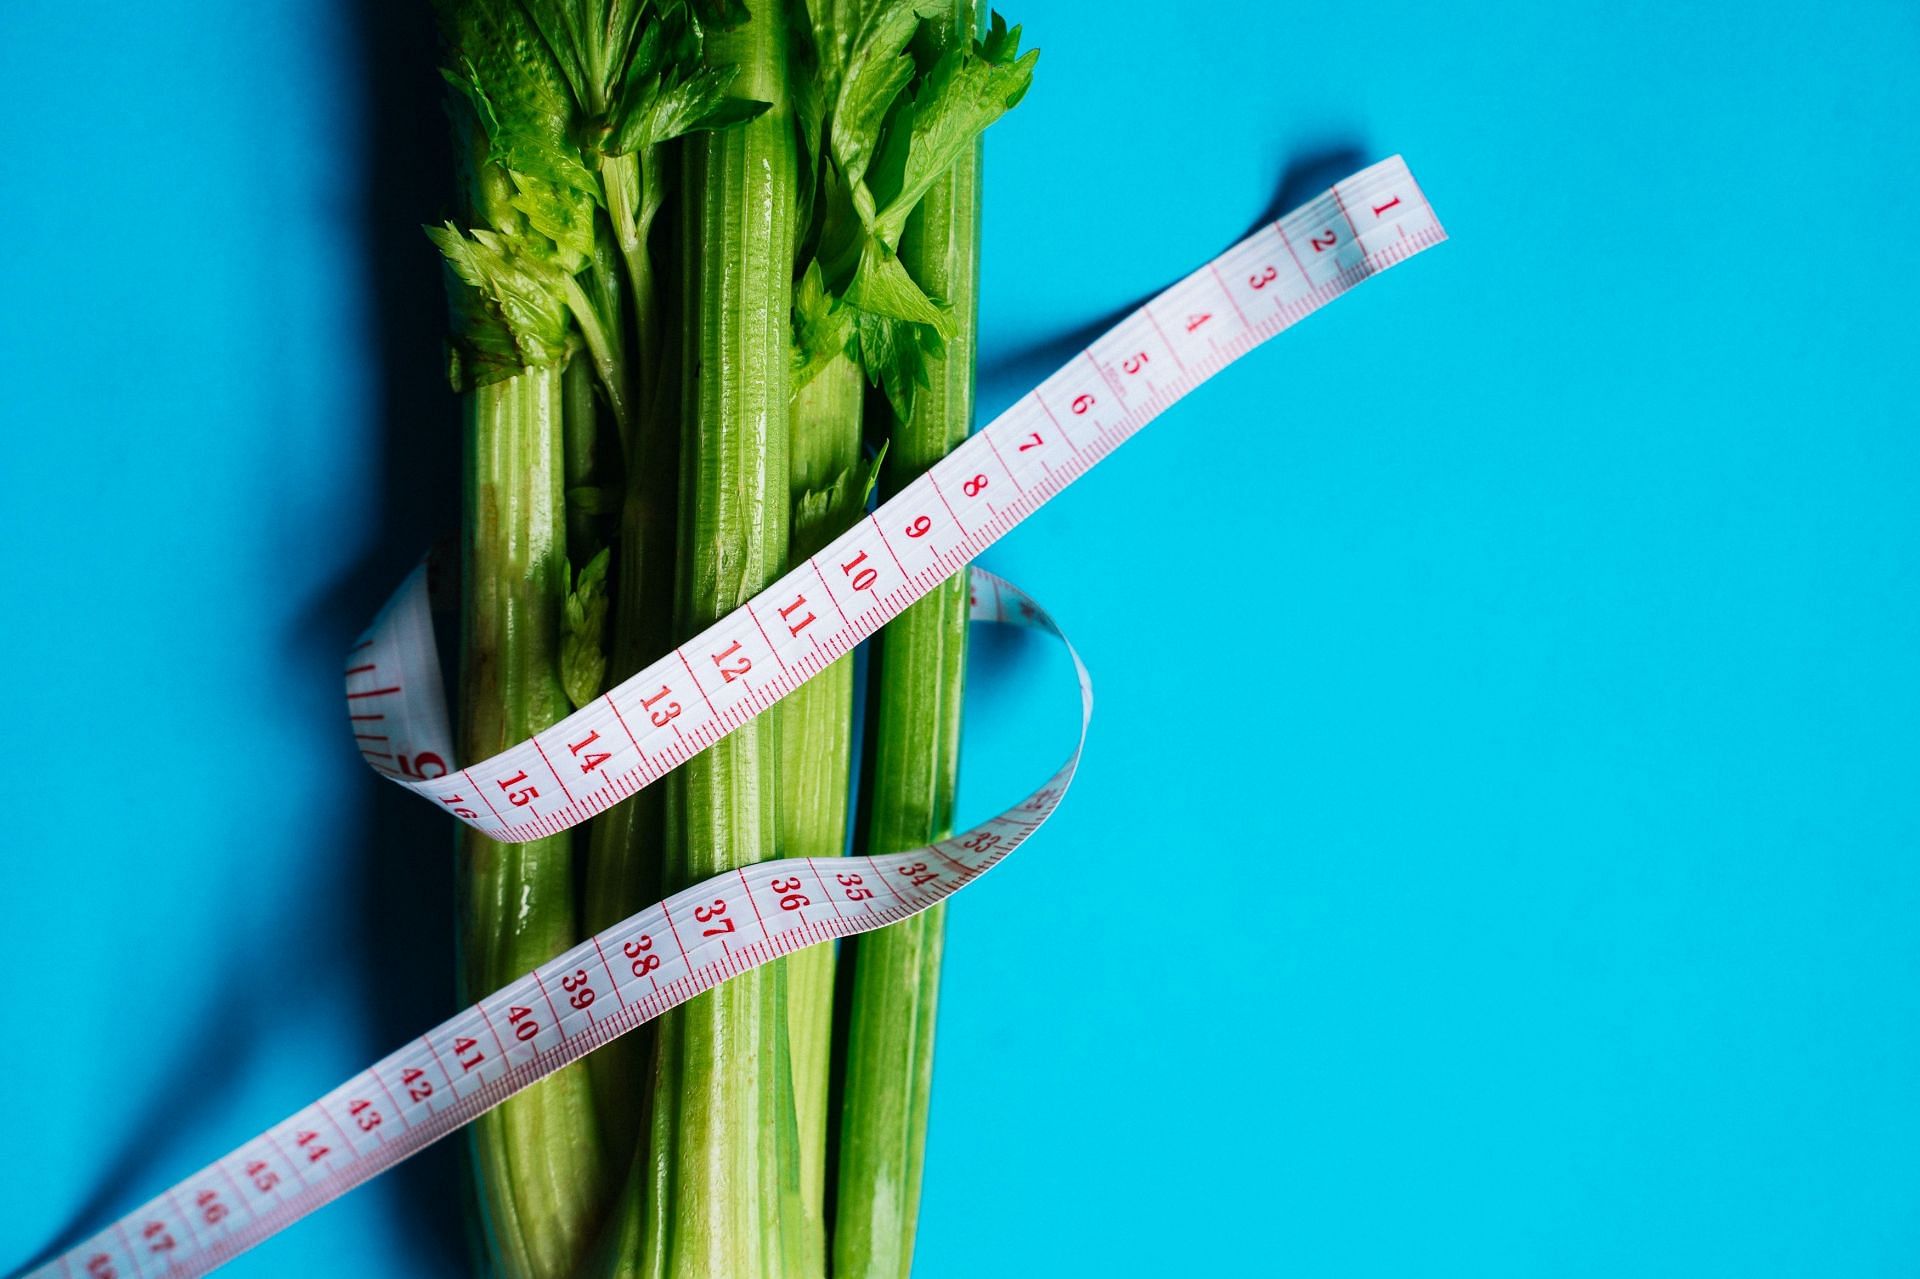 Celery juice may be good for weight loss because of its high fiber and water content that can keep you full for longer (Image via Pexels @Anna Tarazevich)